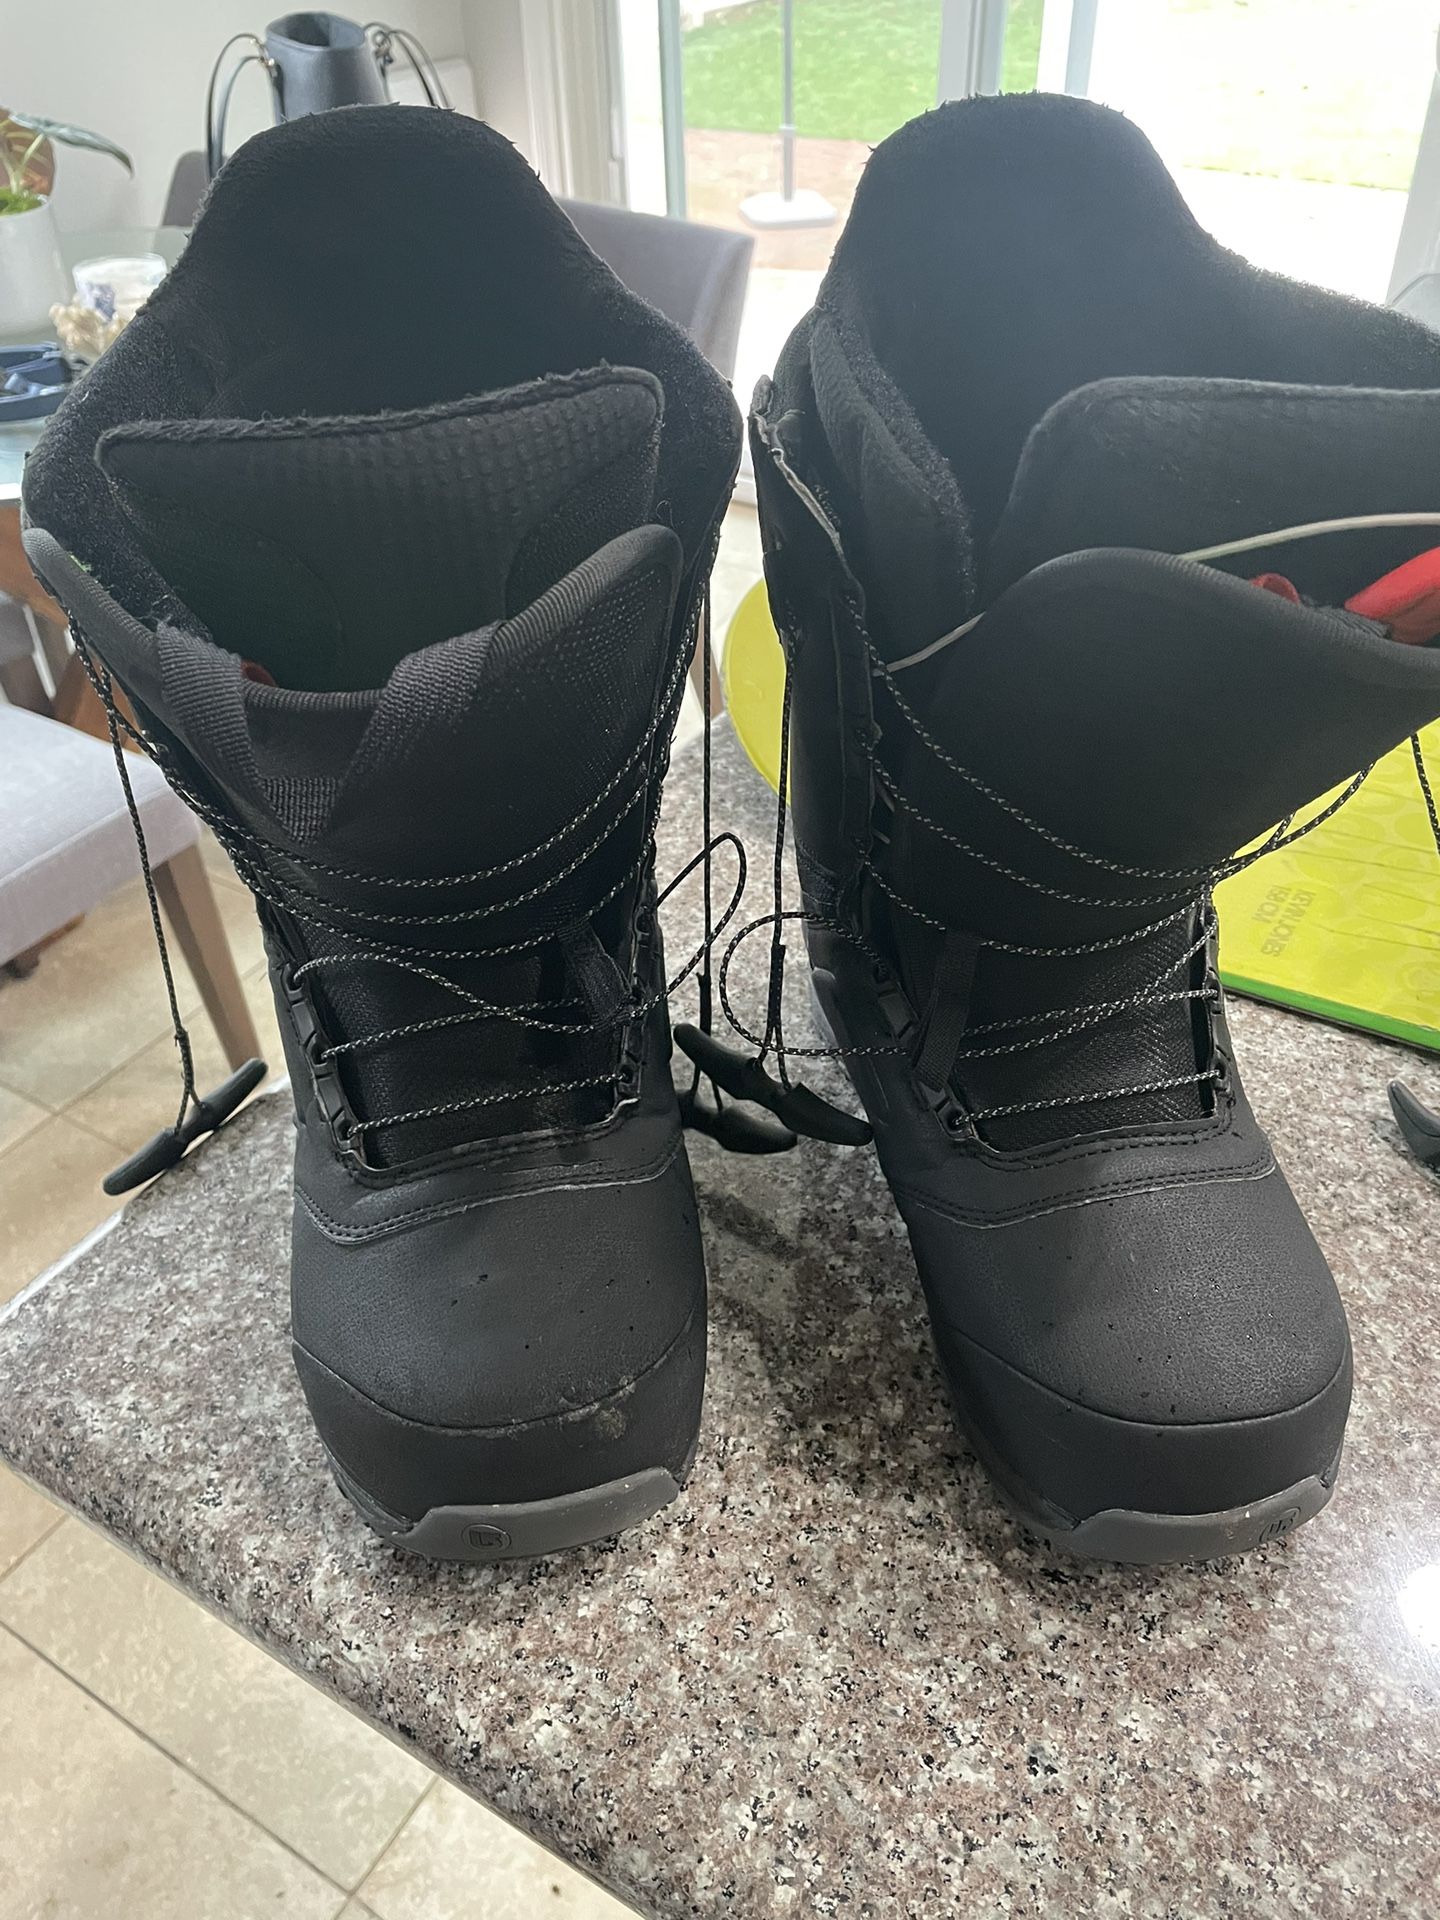 Burton Ruler Mens Boots for Sale in San CA - OfferUp